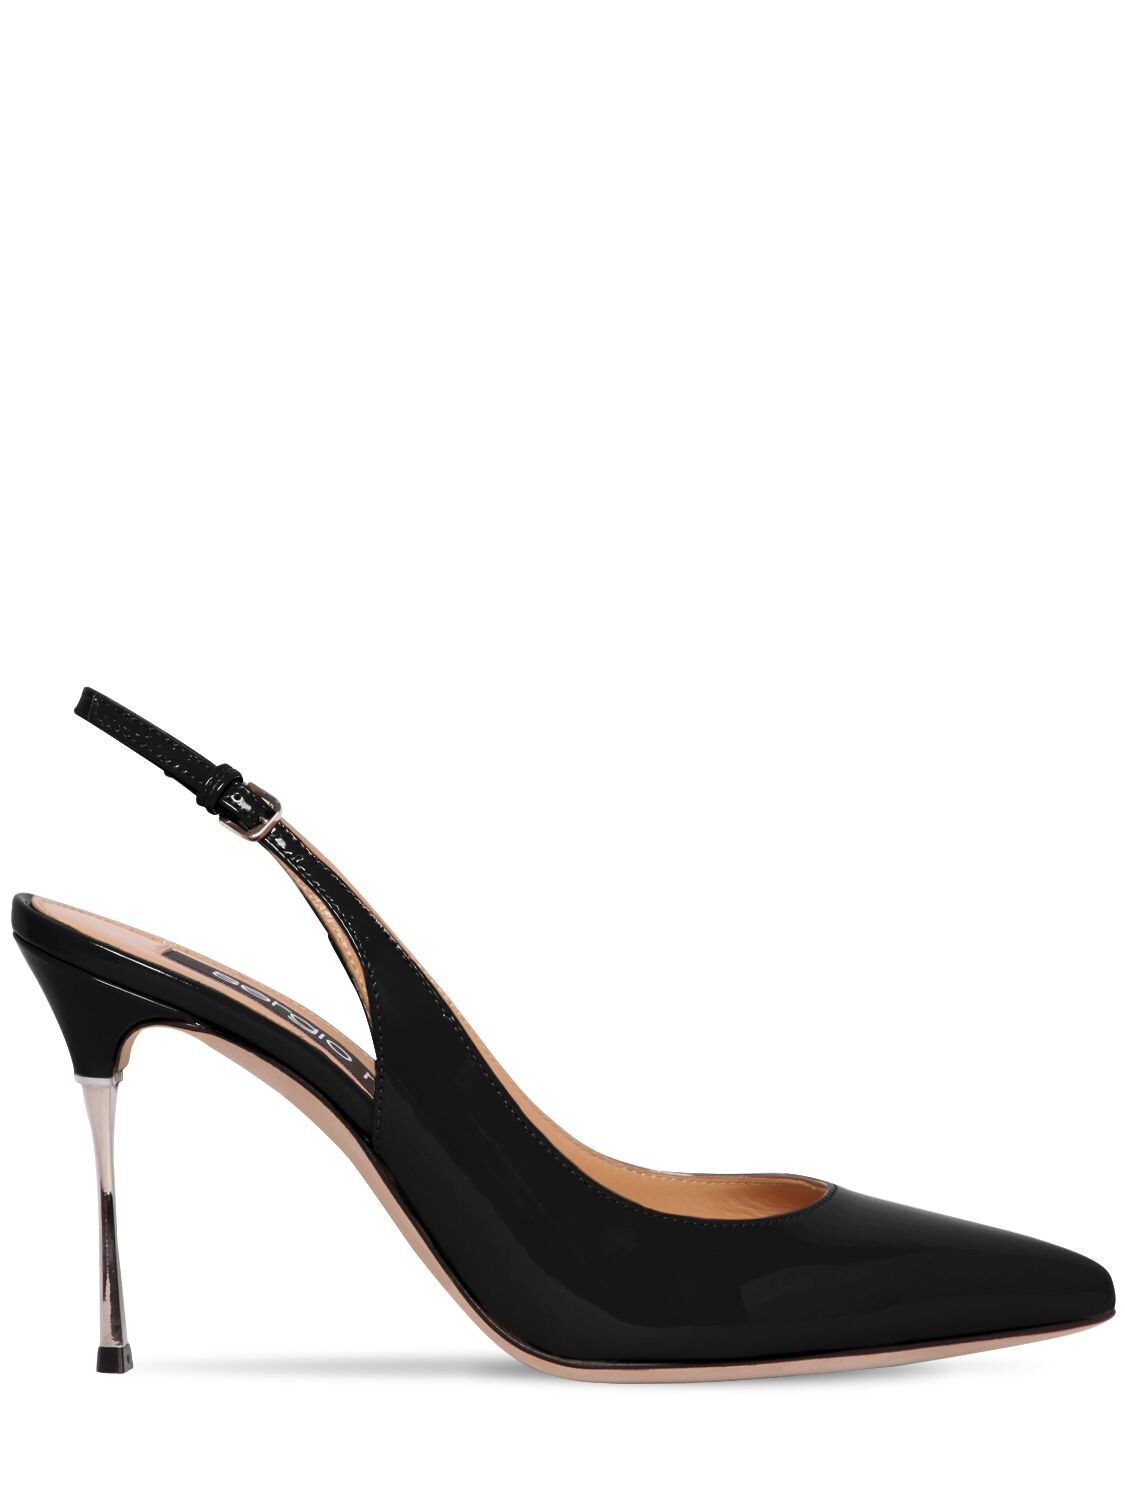 Sergio Rossi 90mm Patent Leather Sling Back Pumps In Black